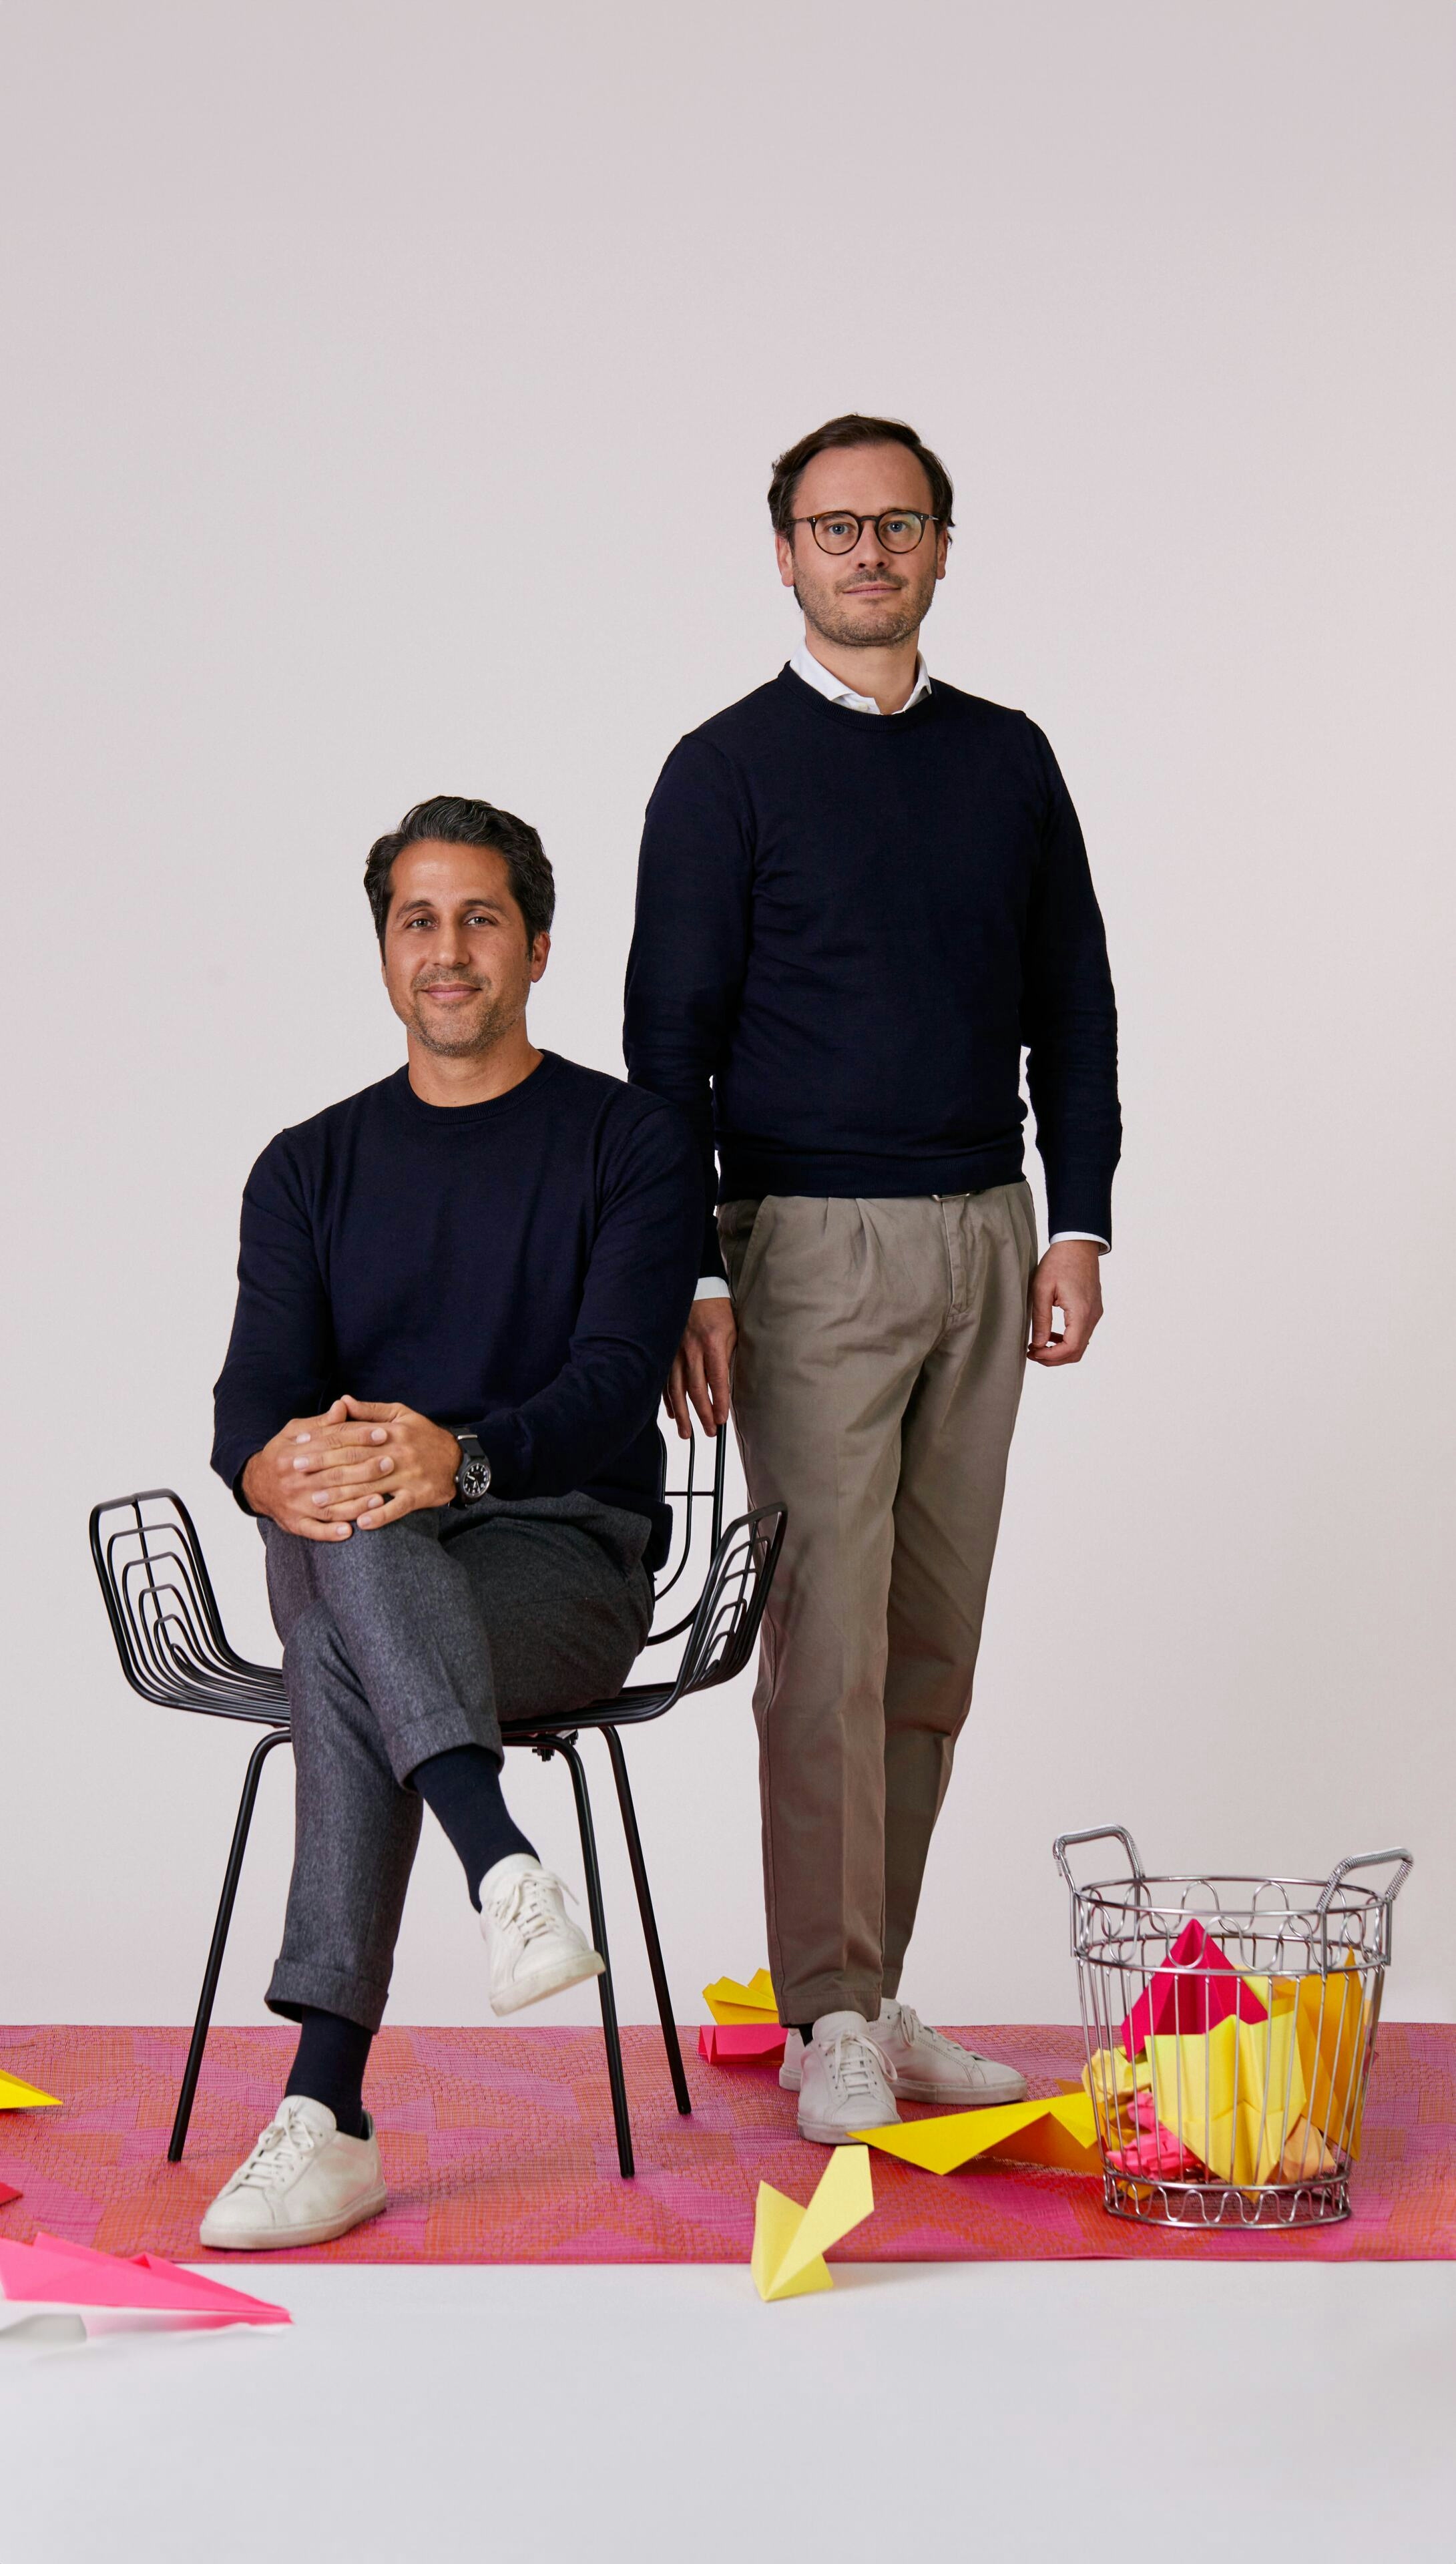 Two men posed in front of a grey background, one standing and one seated